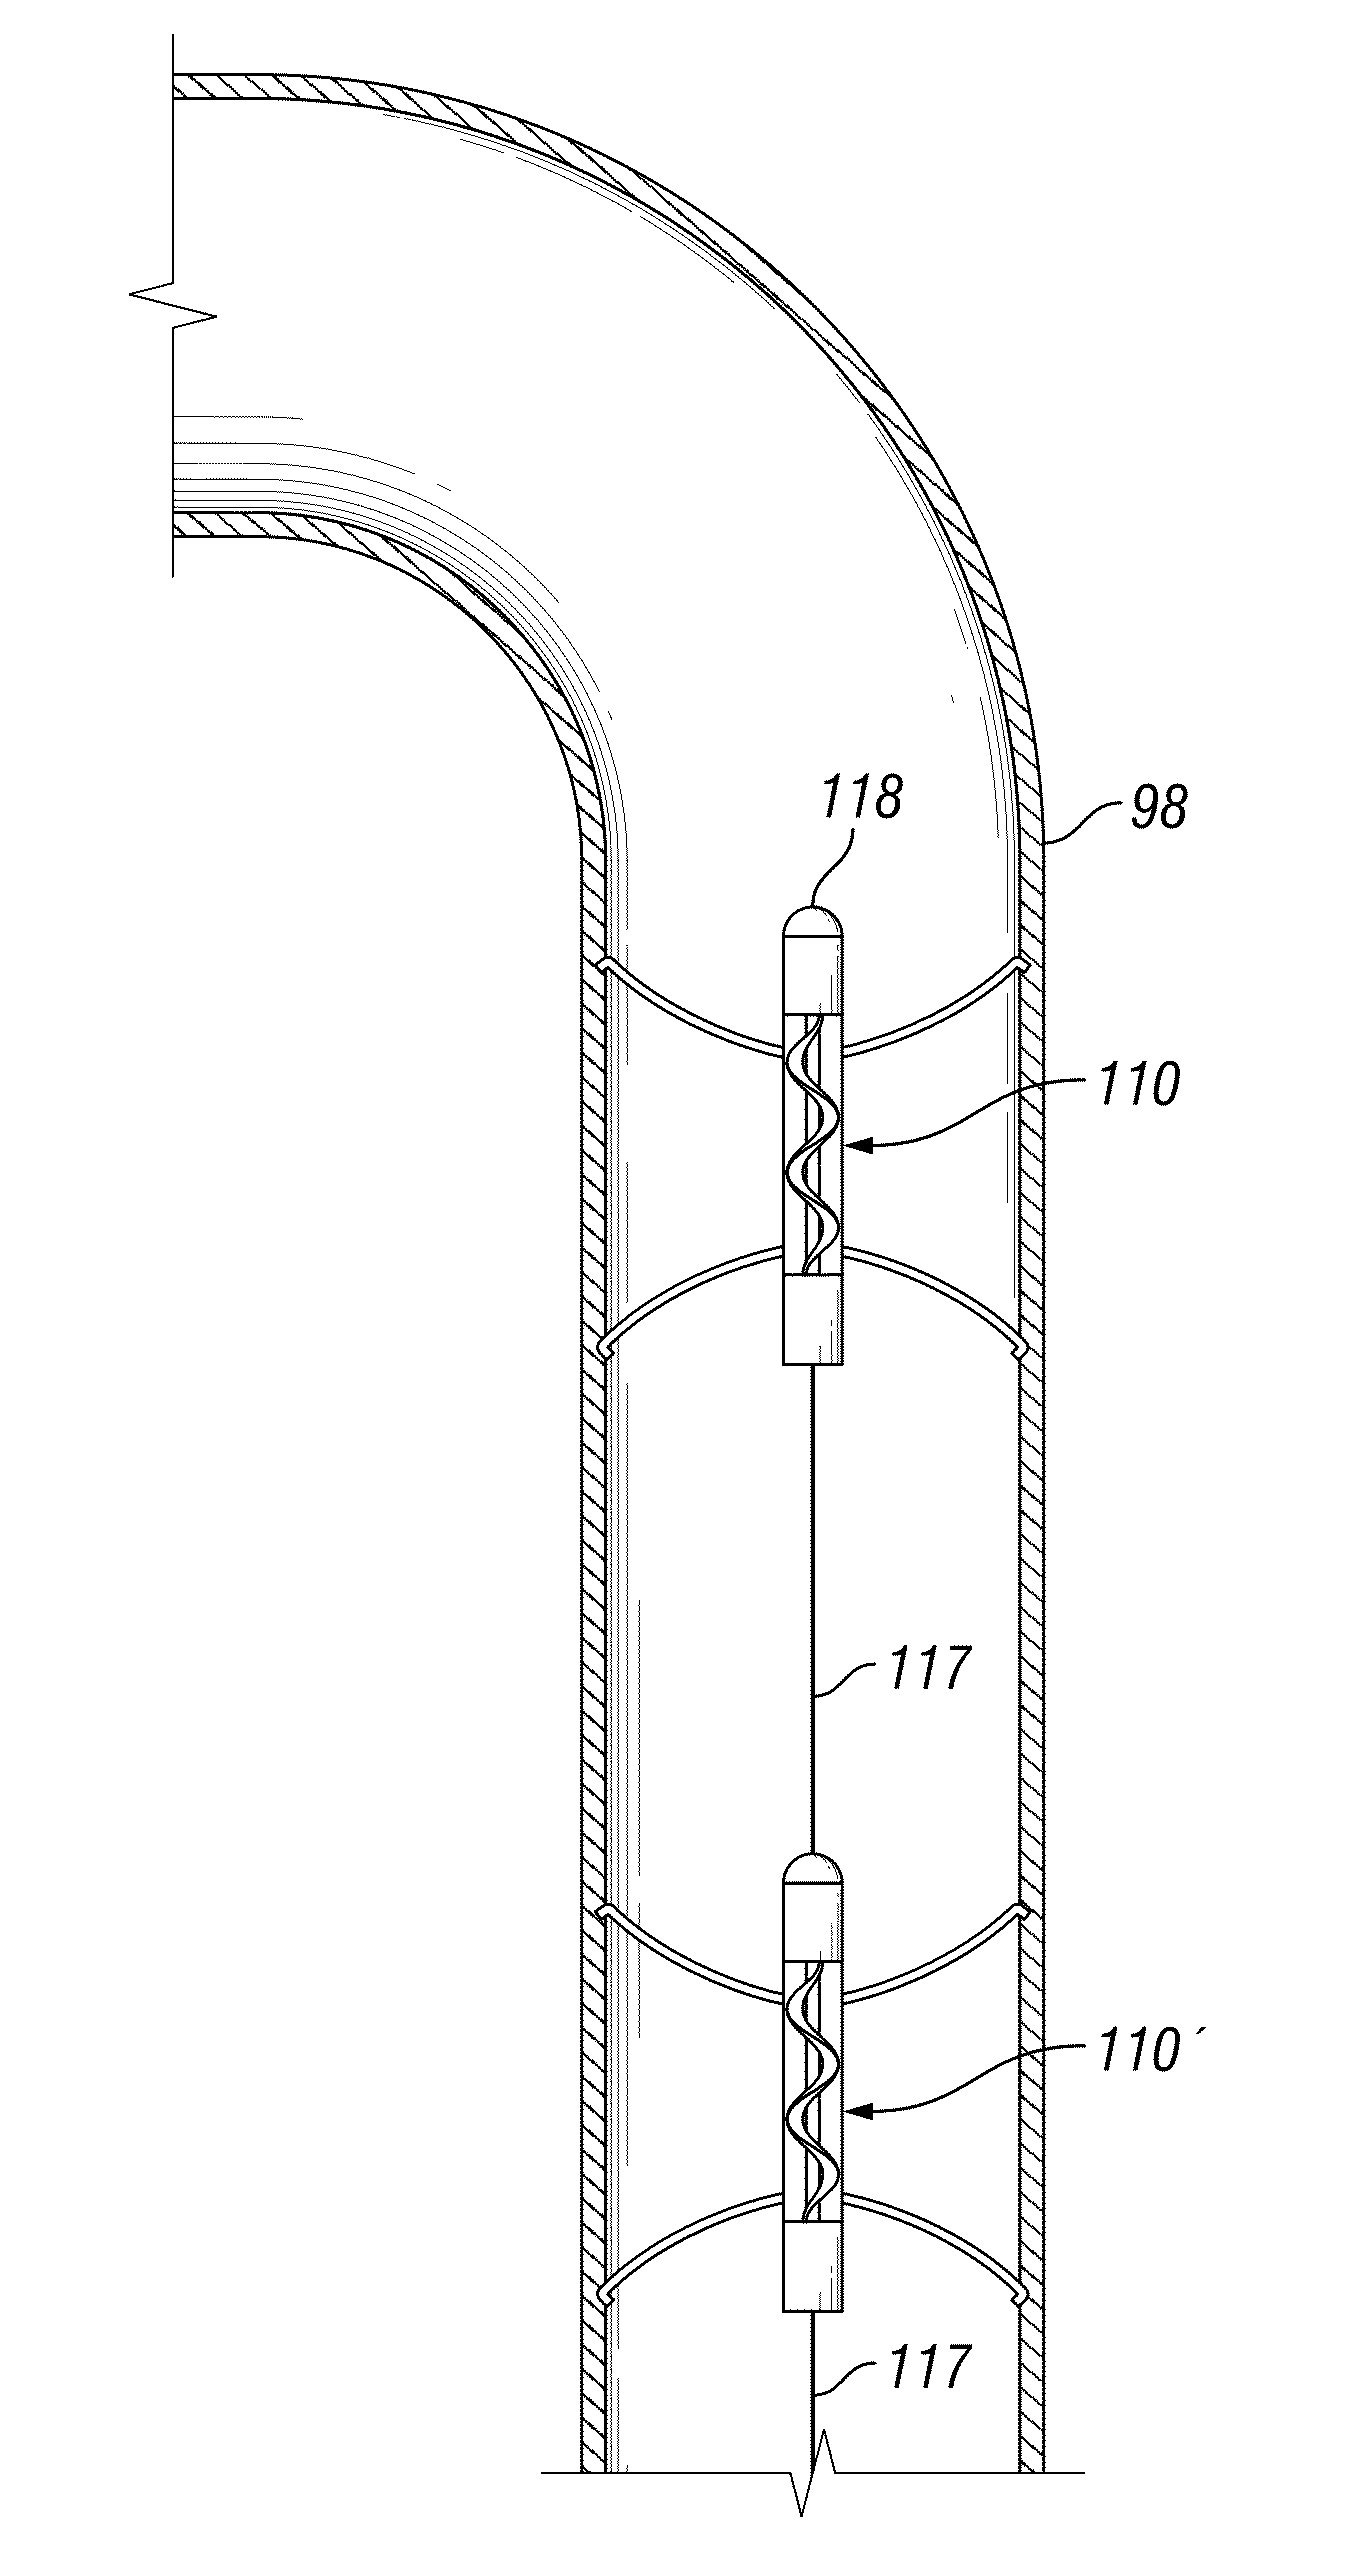 Systems and methods for fluid flows and/or pressures for circulation and perfusion enhancement